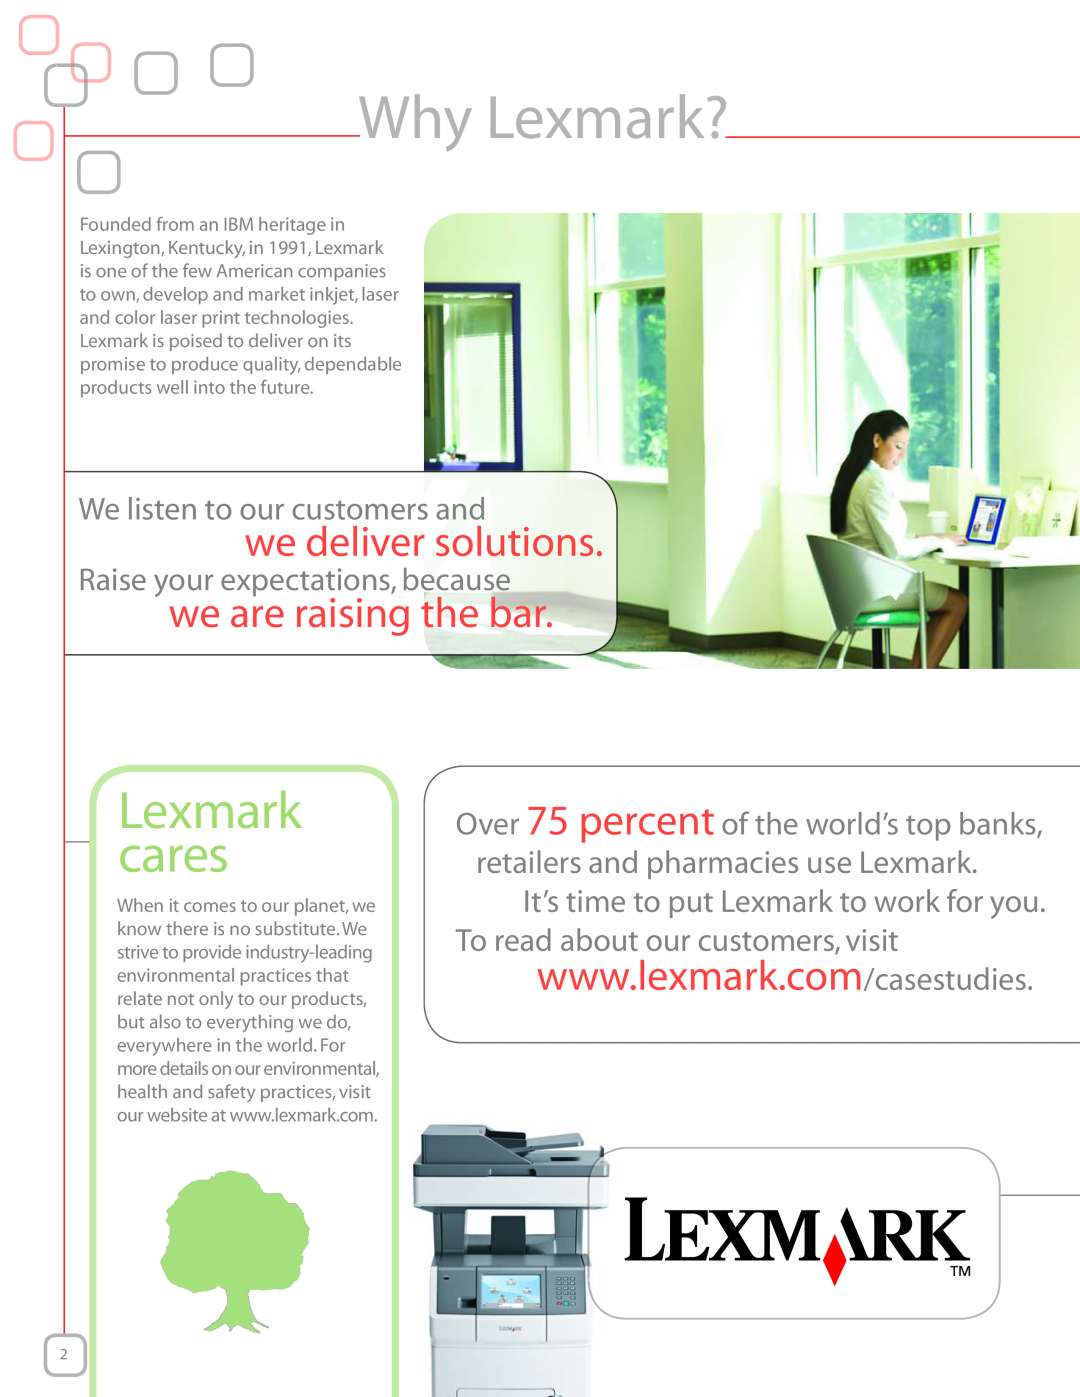 Lexmark High performance color MFP, XS736de manual Why Lexmark?, we deliver solutions, we are raising the bar, Lexmark cares 